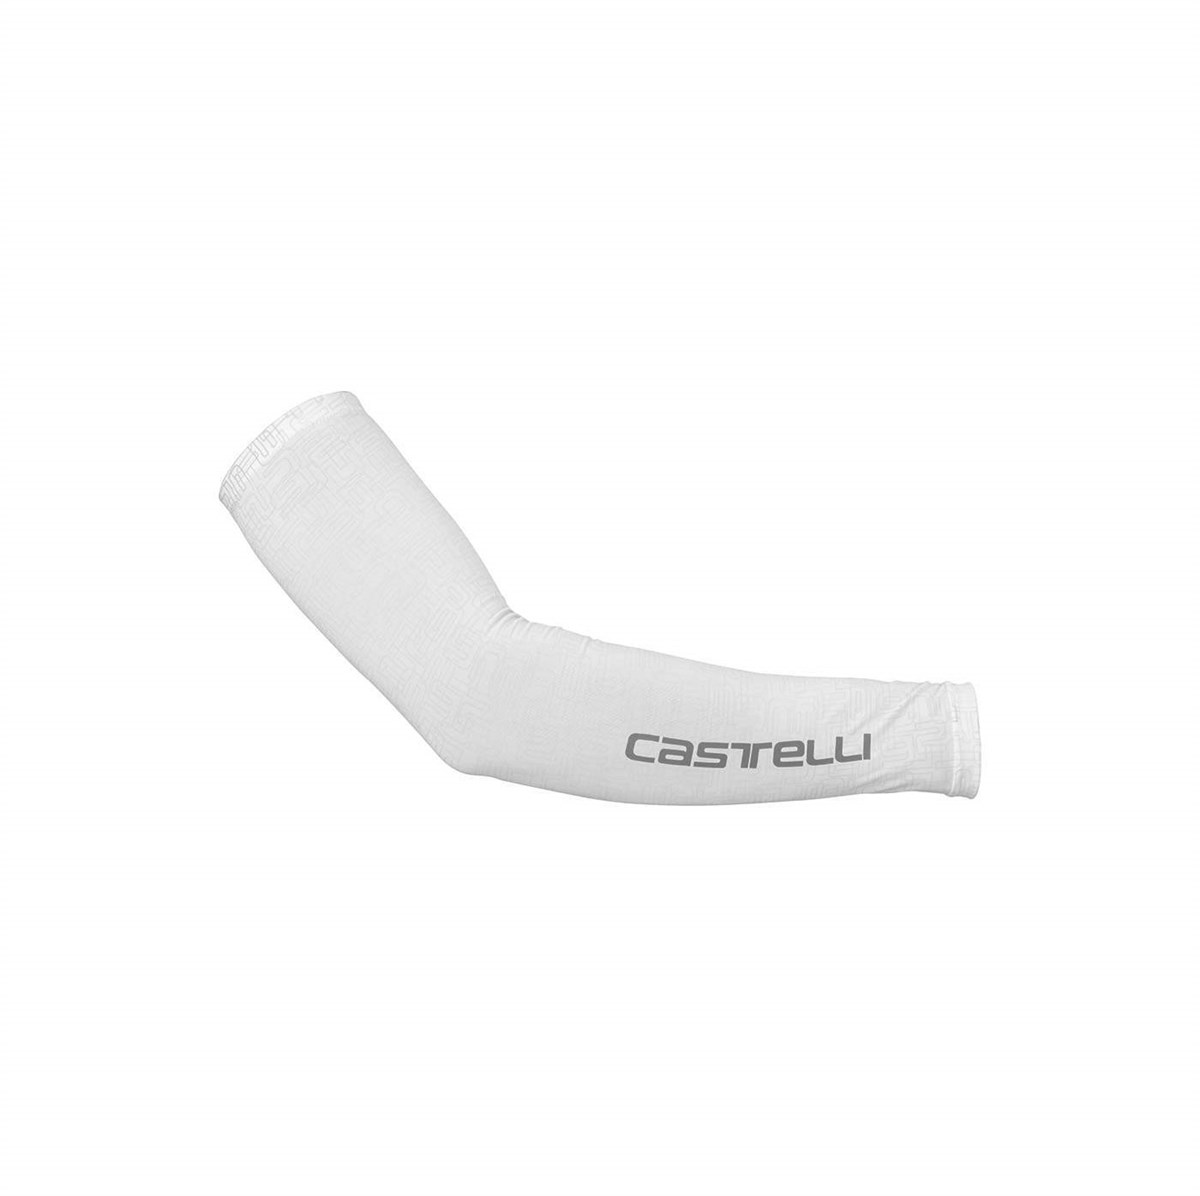 Castelli Chill Sleeves Cycling Arm Warmers SS16 product image